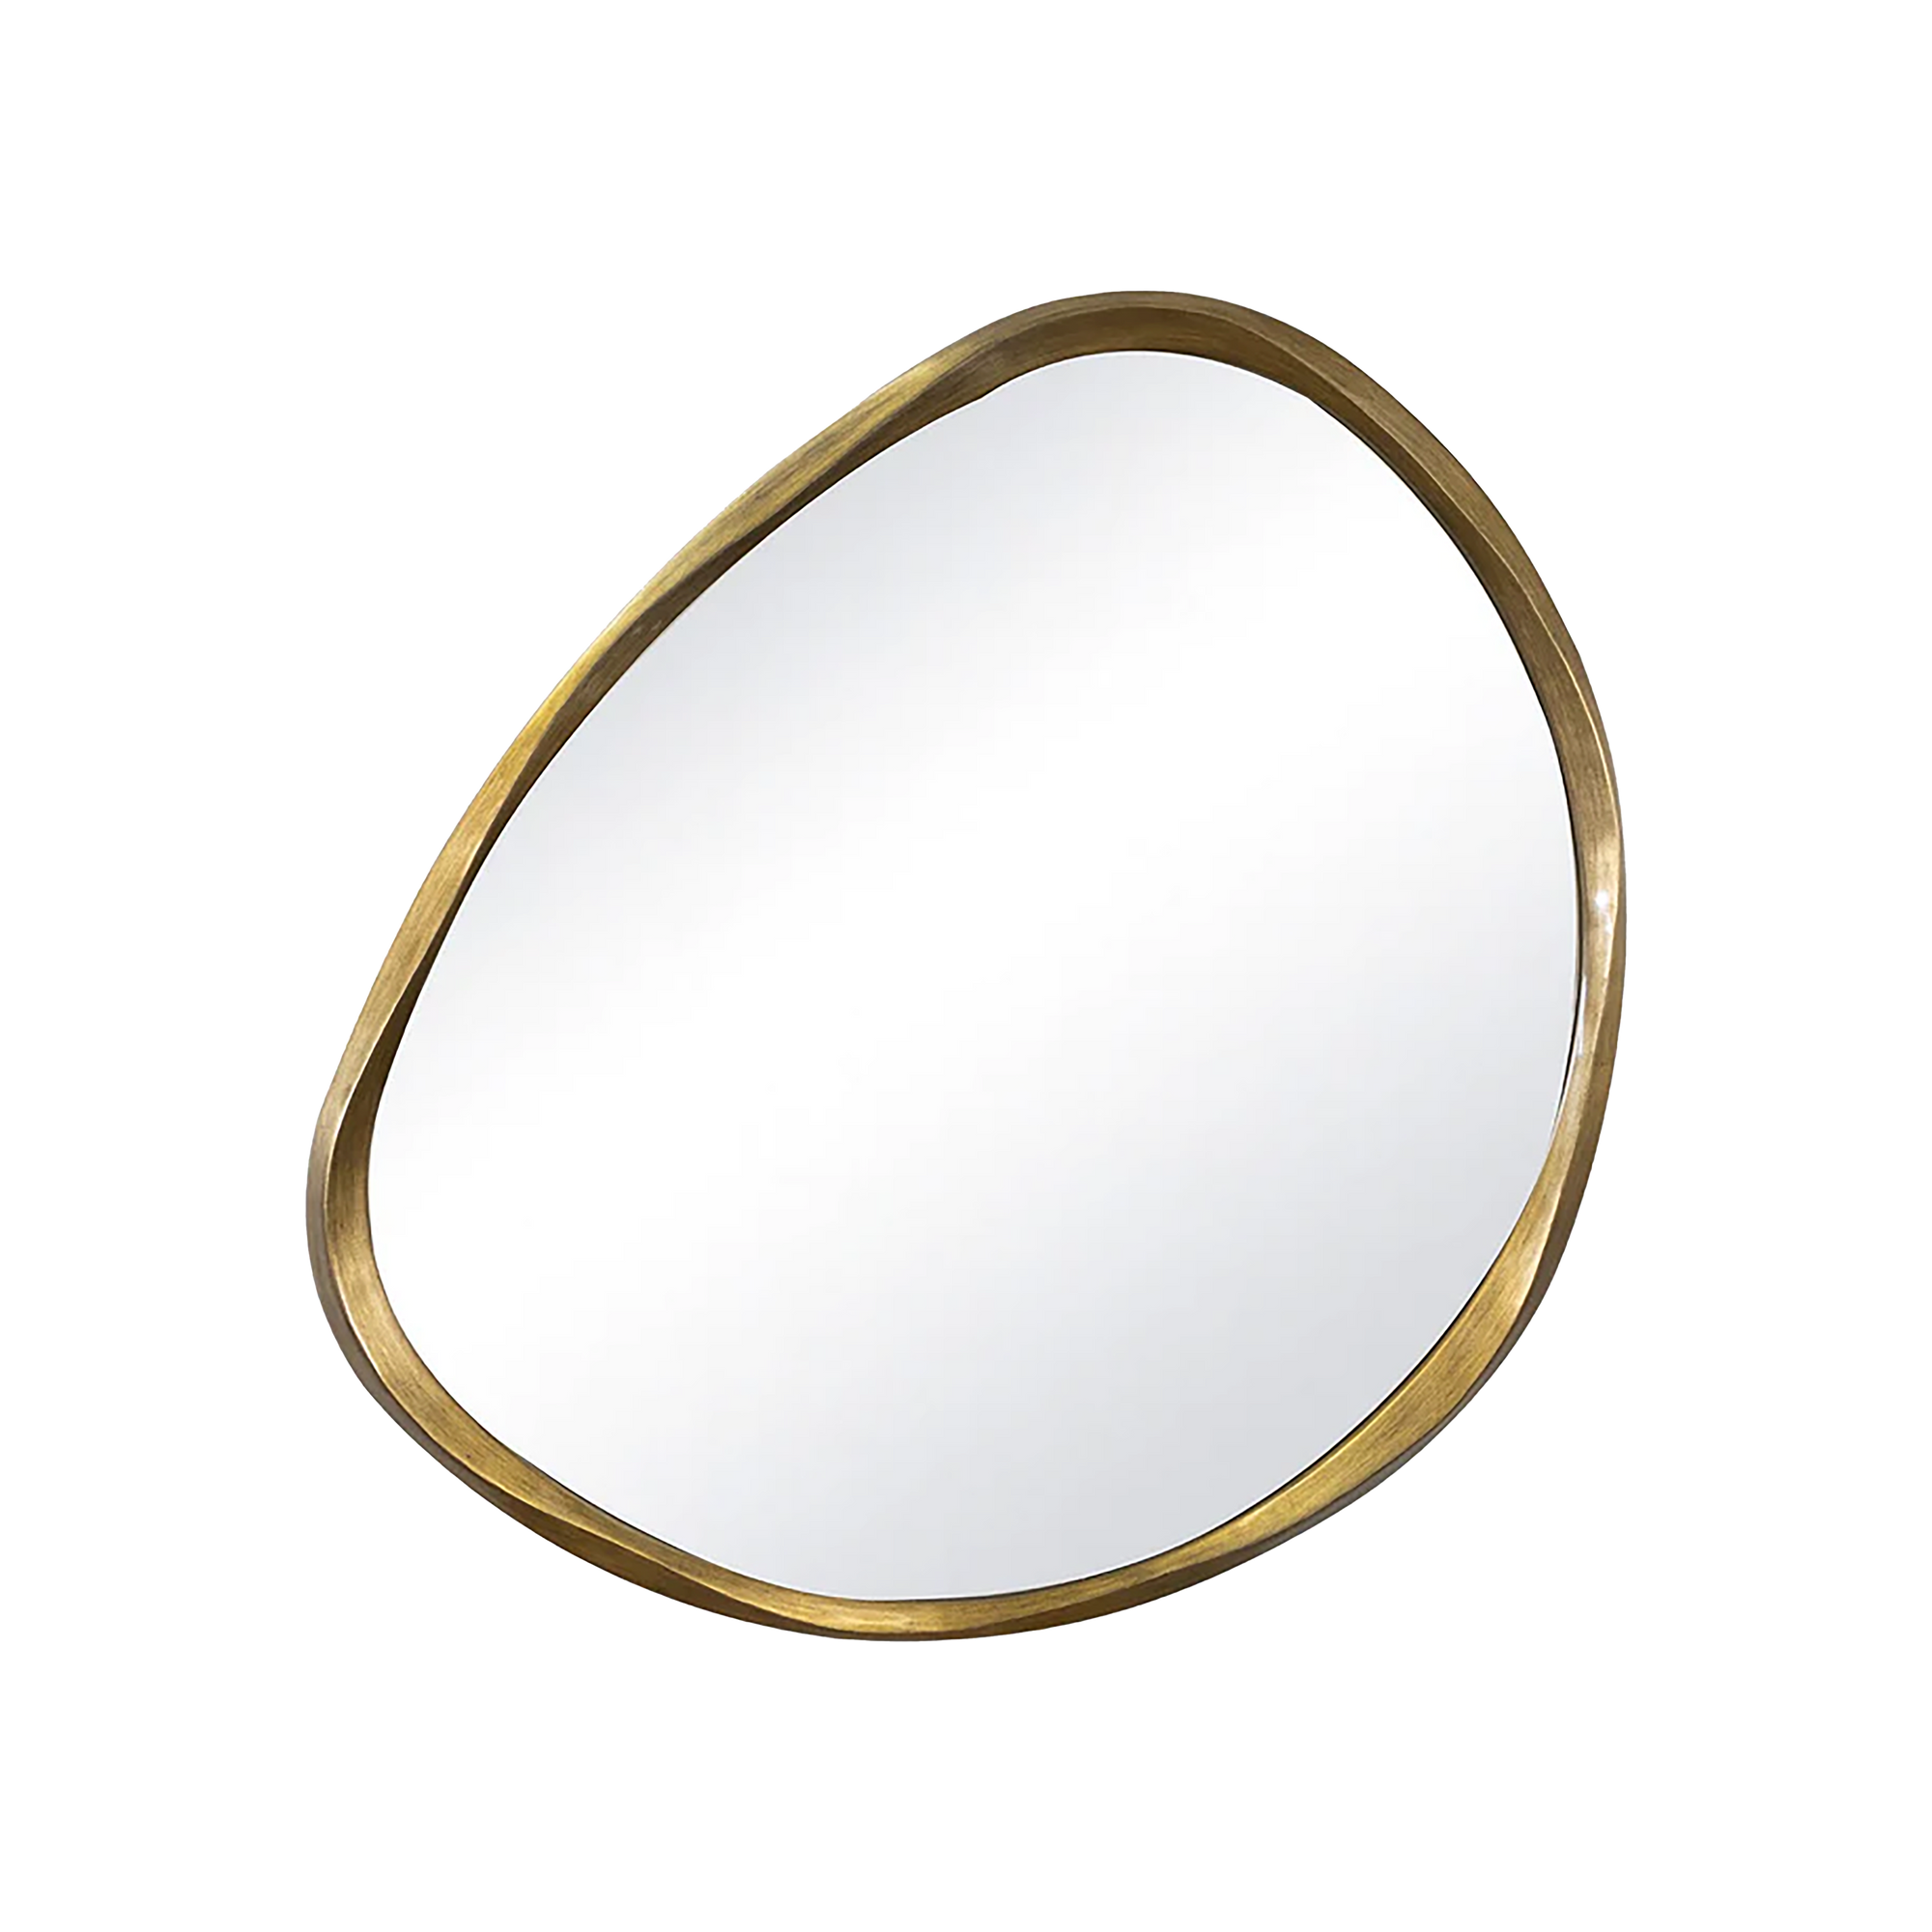 The beauty of the Monte Mirror is in its unique, organic shape.